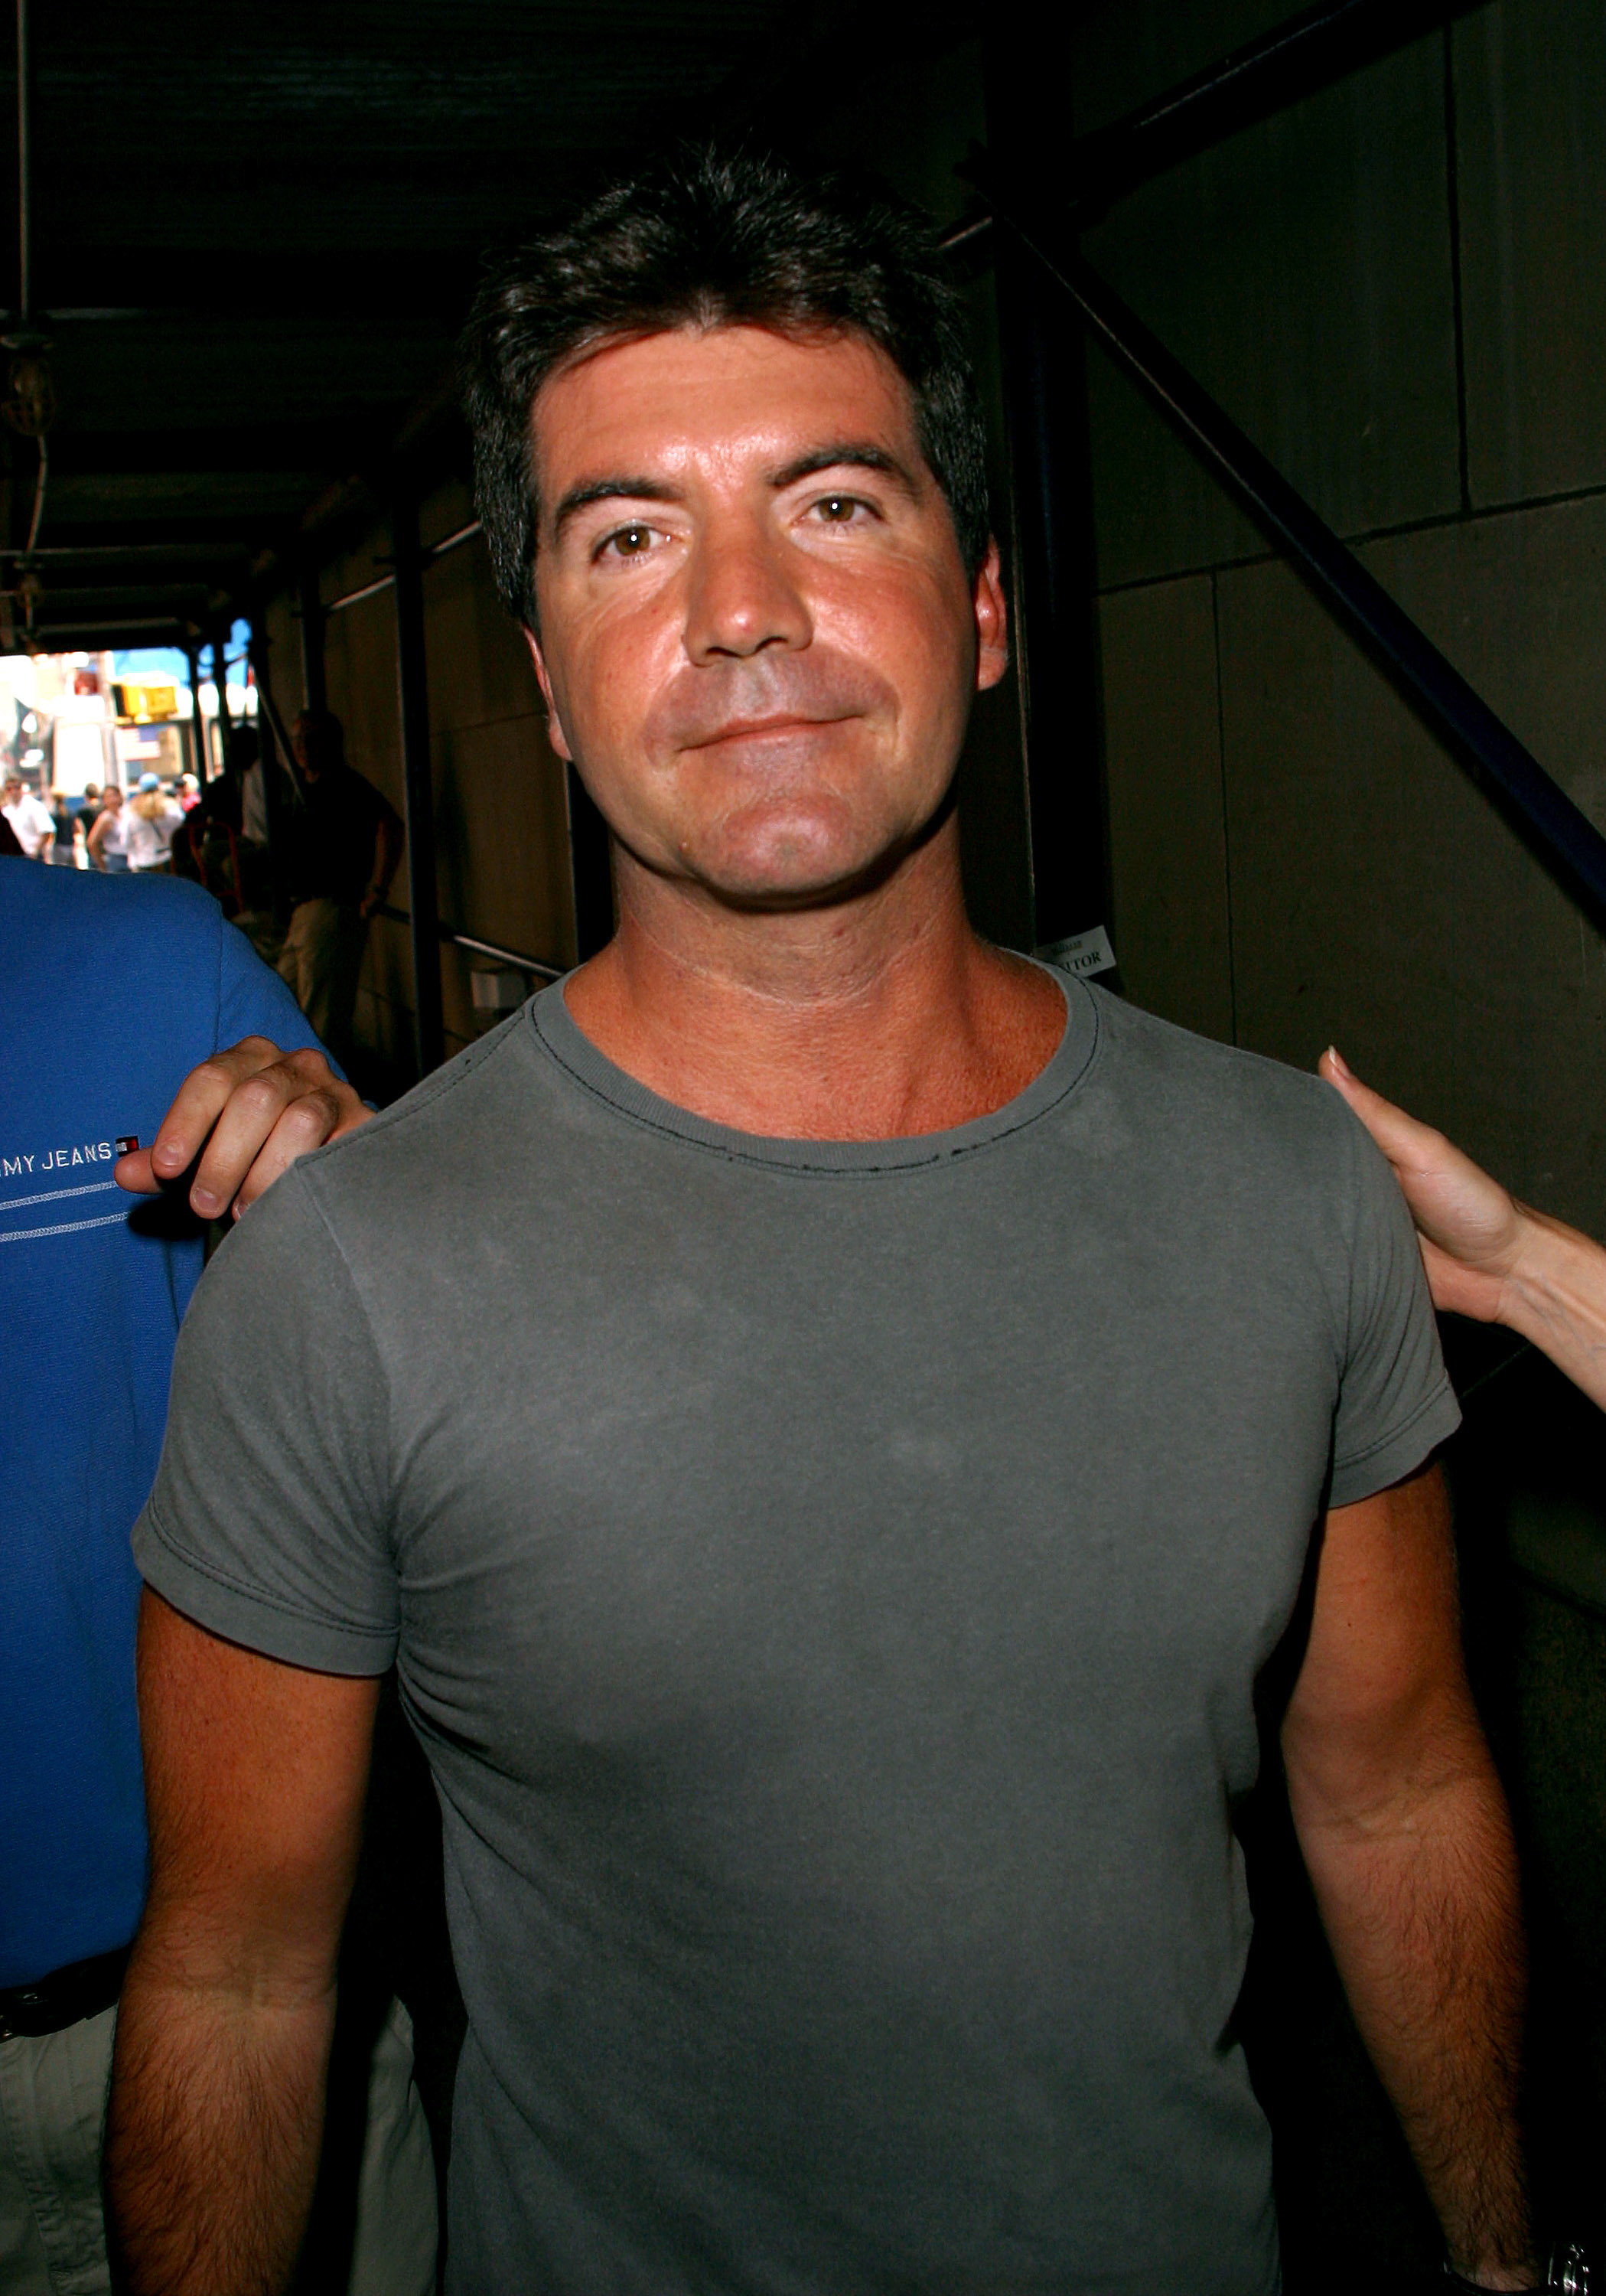 Simon Cowell on "American Idol" in New York in 2002 | Source: Getty Images